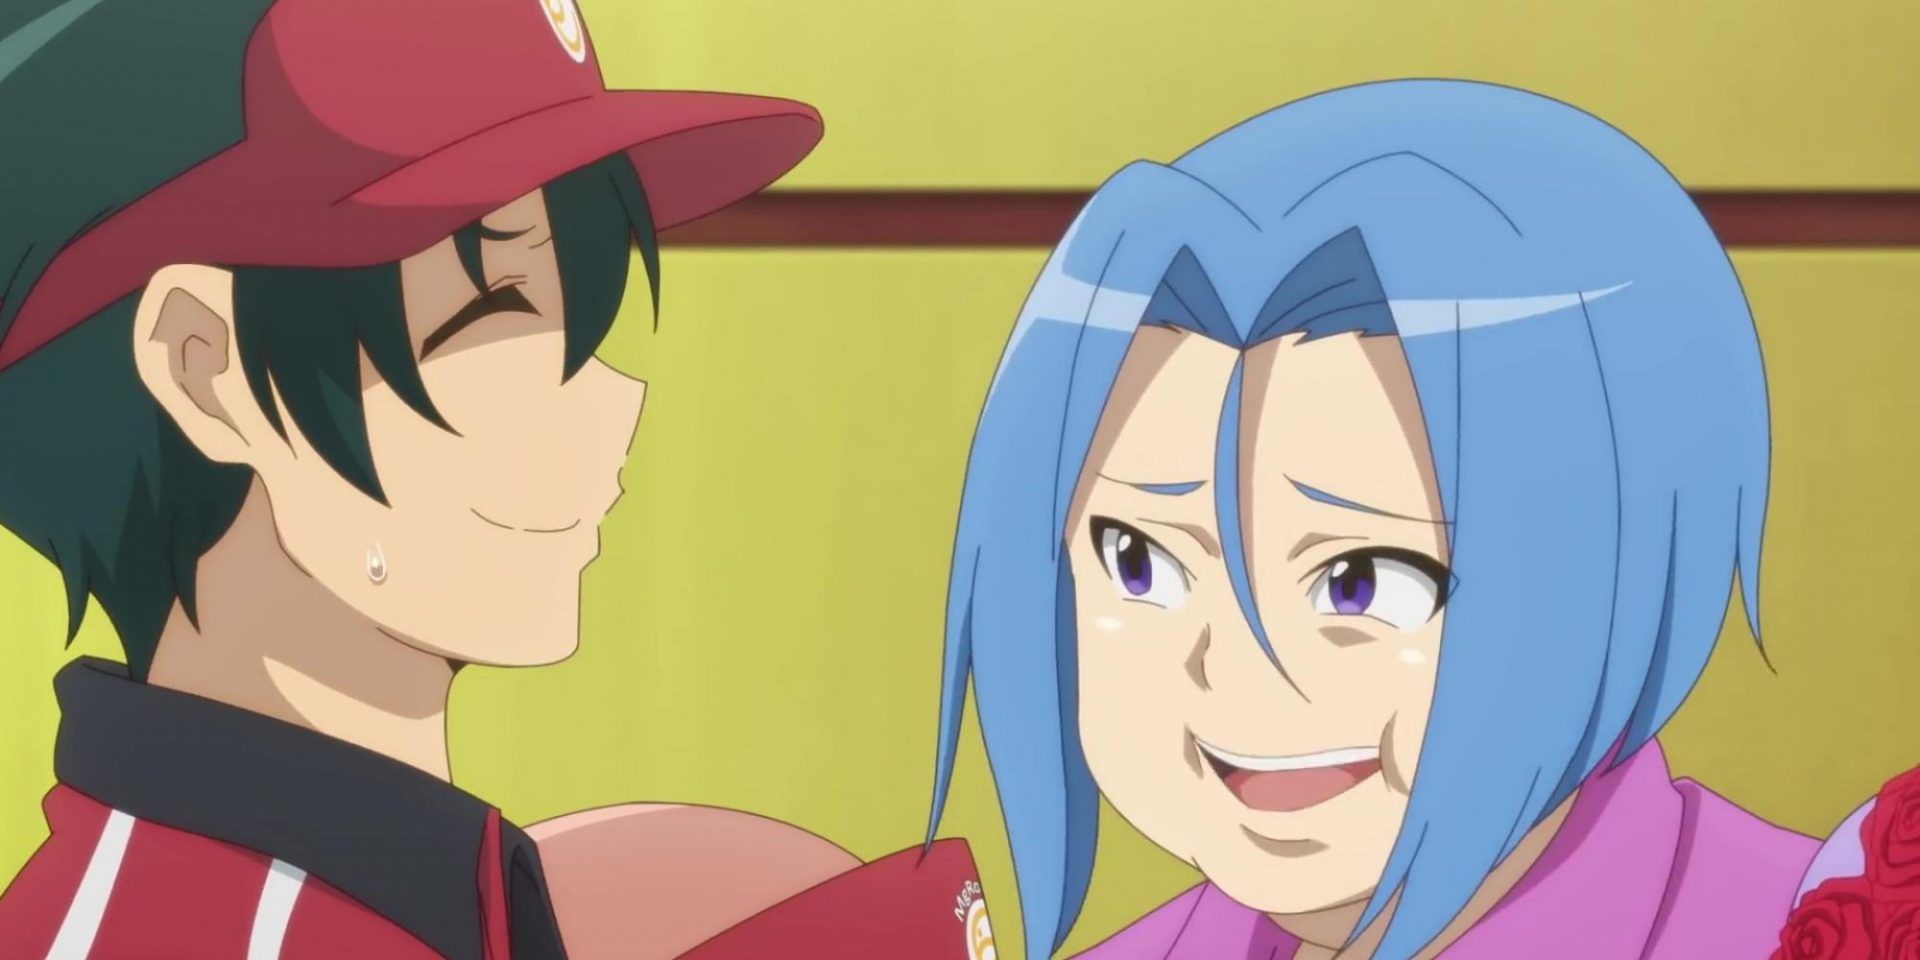 The Devil is a Part-Timer Season 2 Episodes #06 – 08 Anime Review